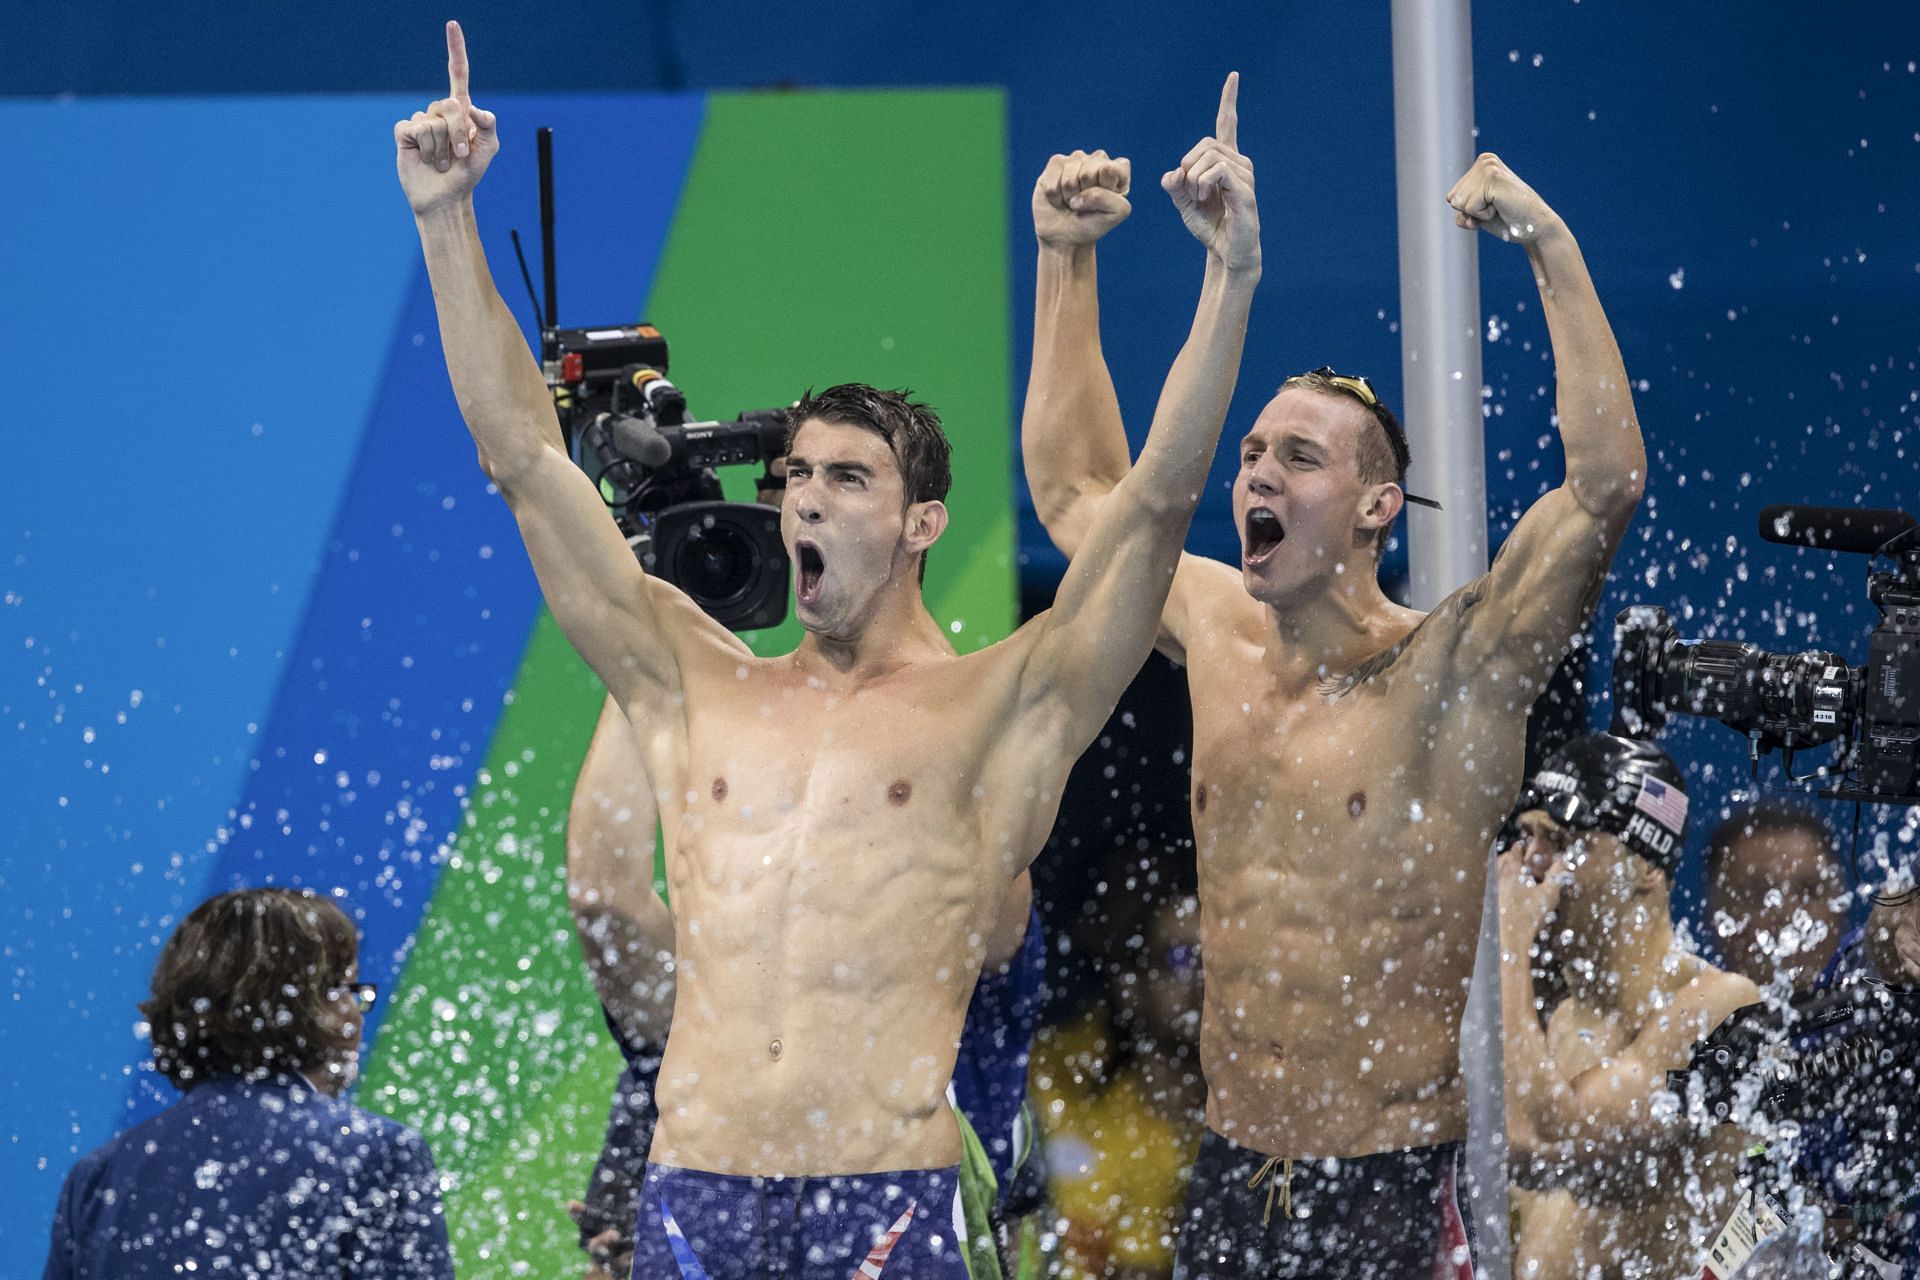 How many world records does Michael Phelps still have?